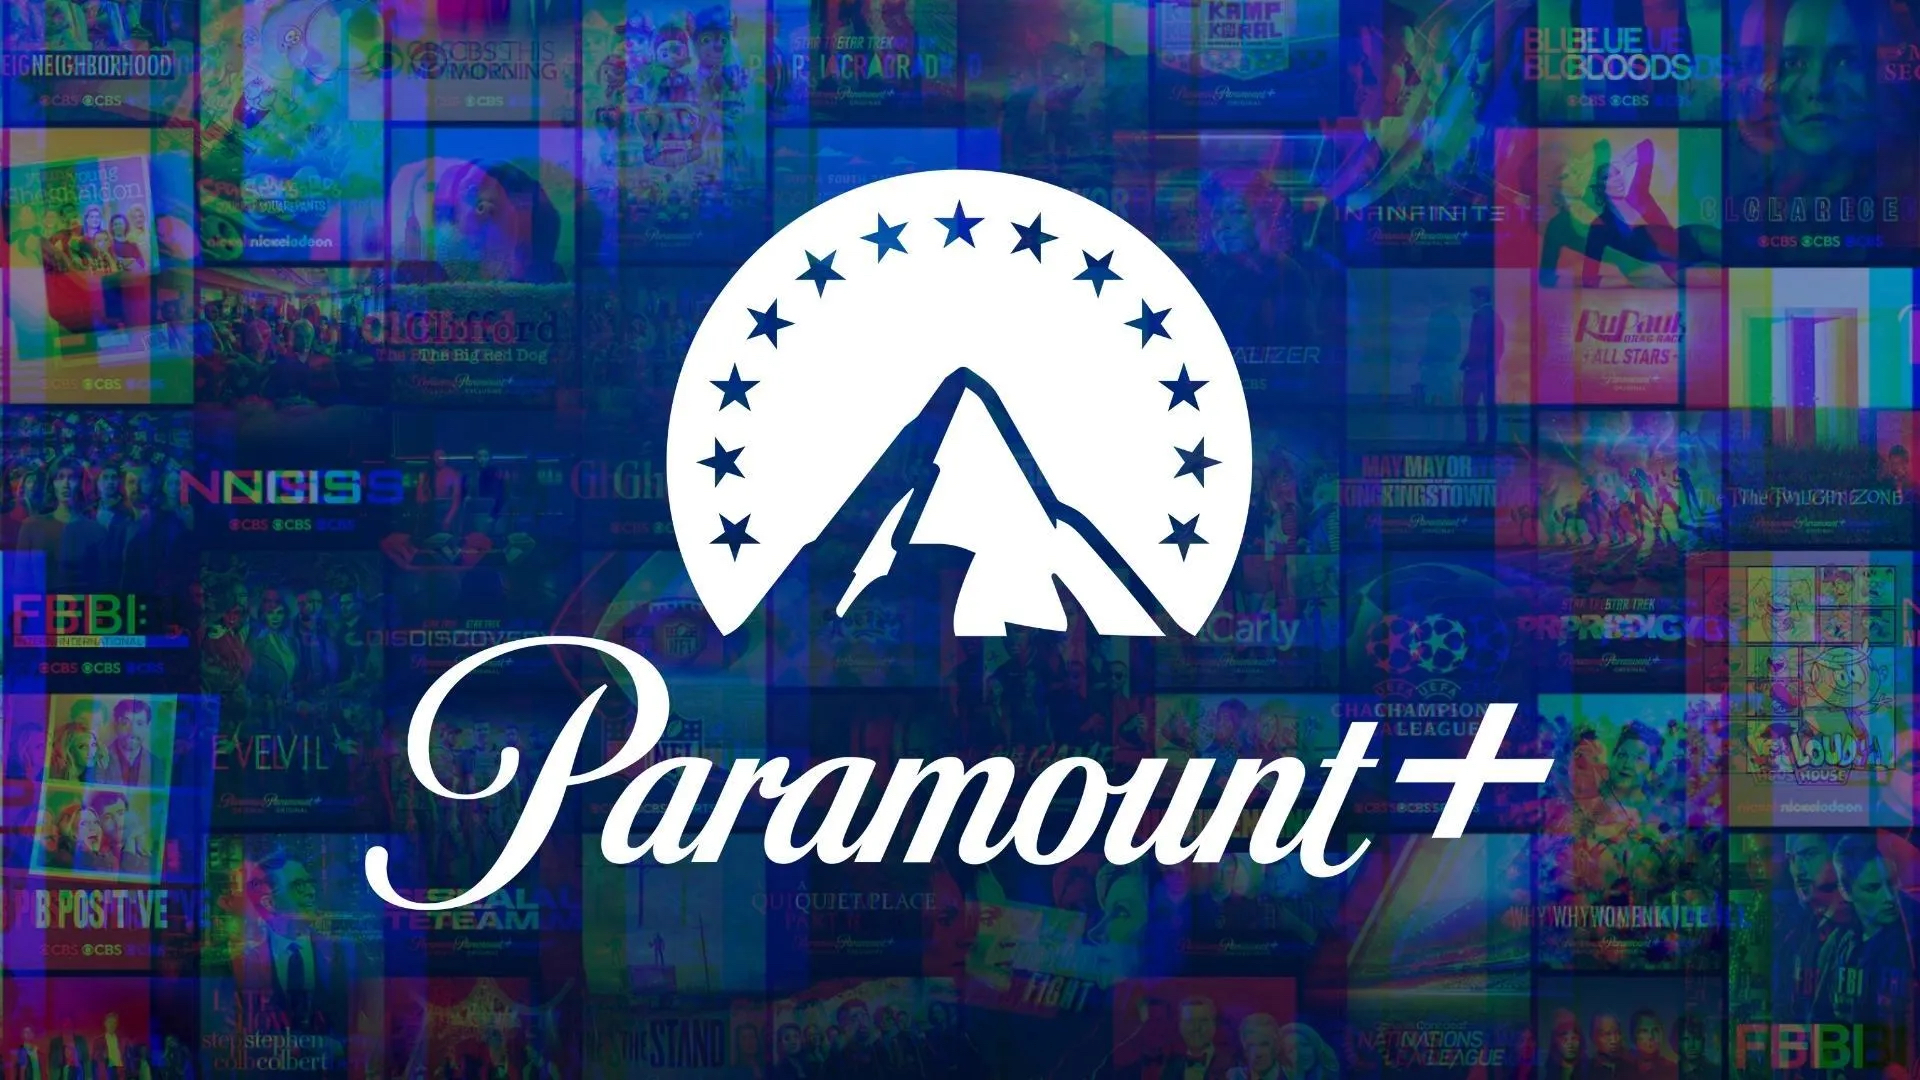 Paramount+ Plans Big Changes How New Partnerships Could Shape the Future of Streaming--